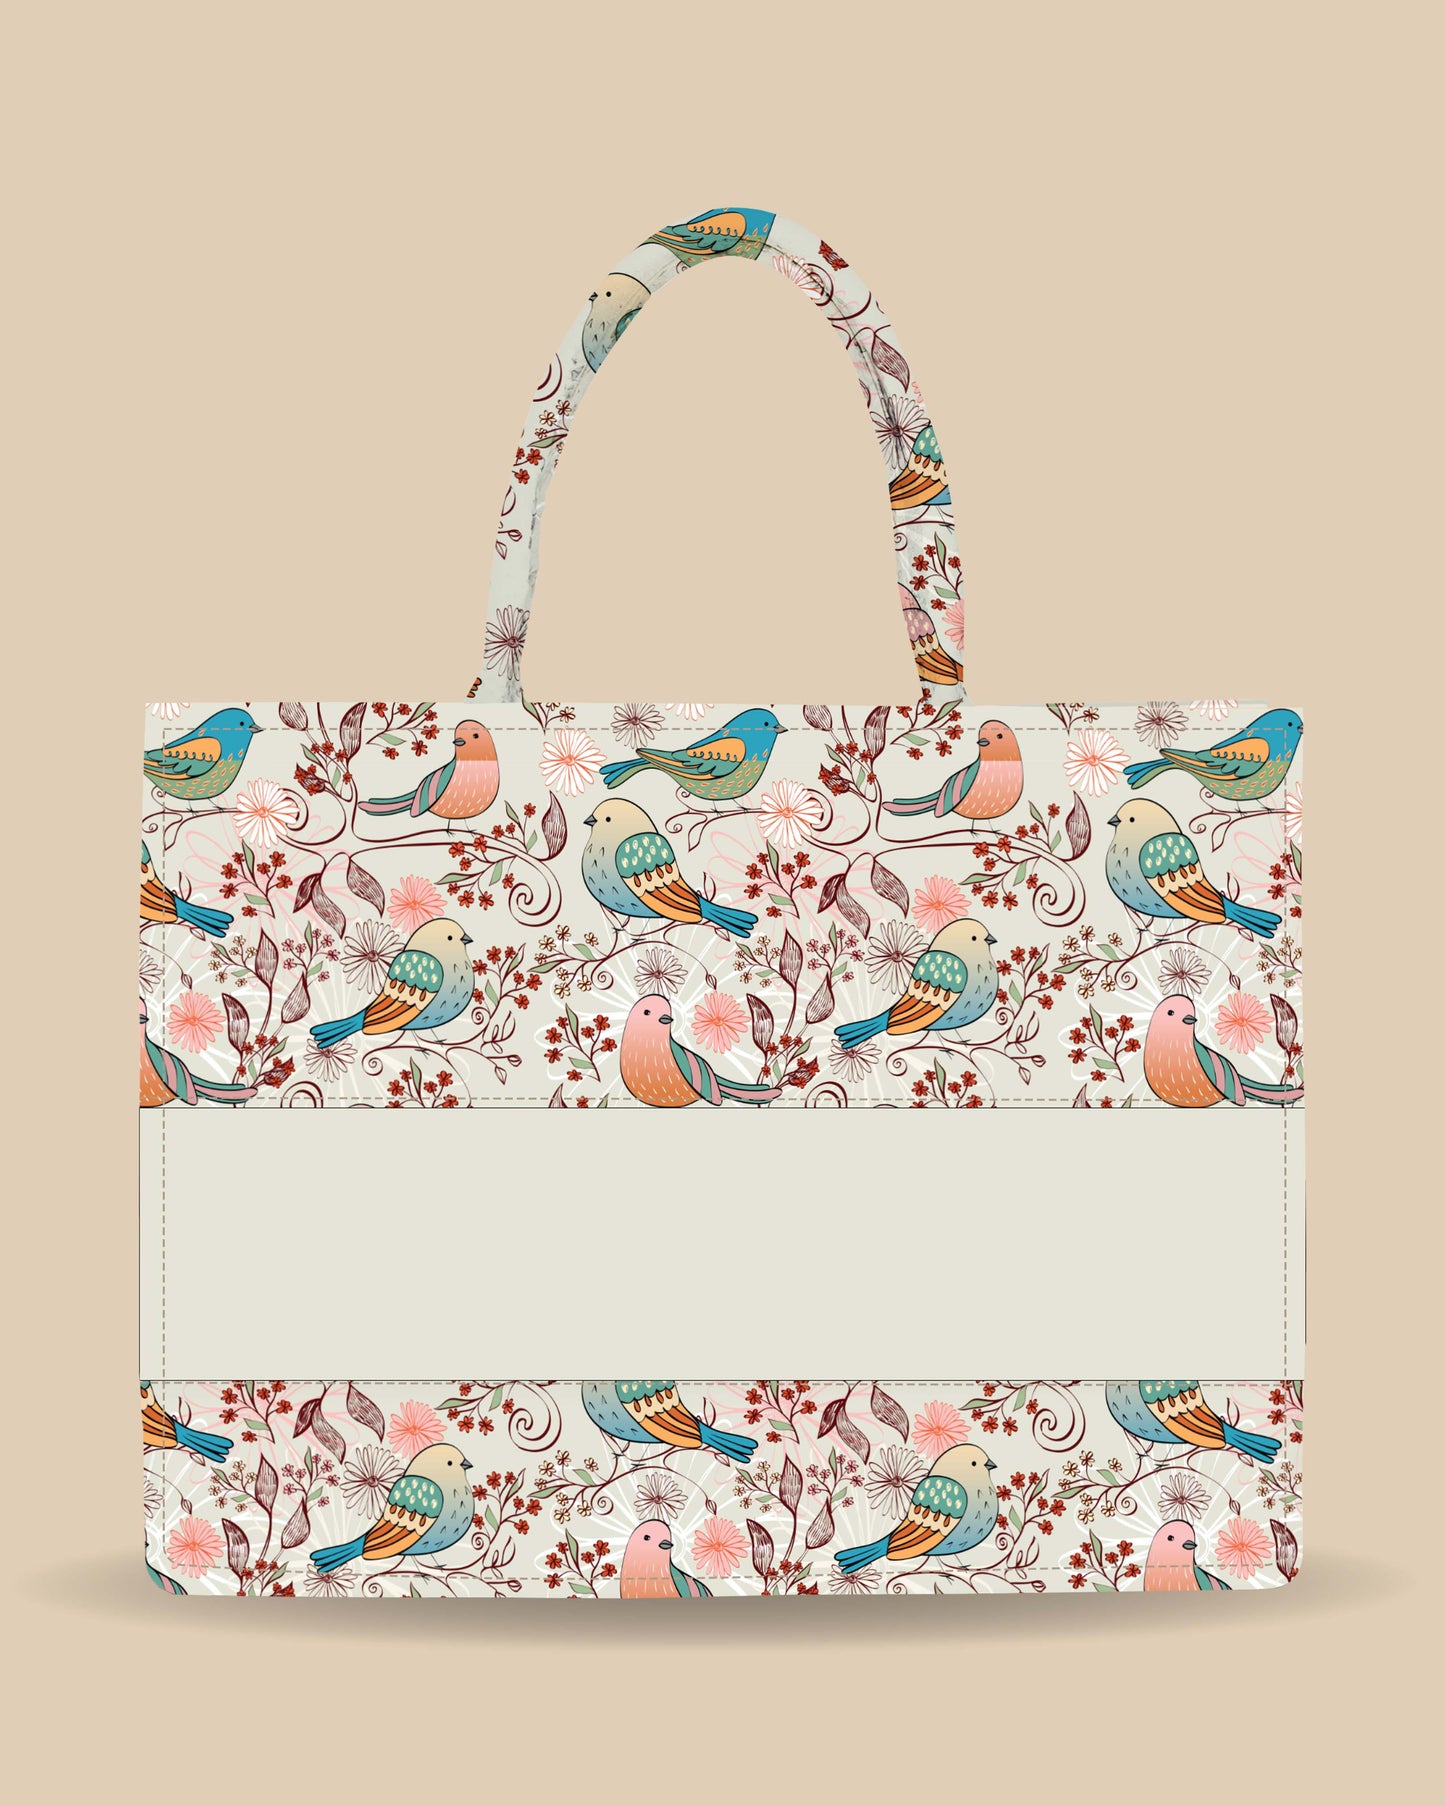 Personalized Tote Bag Designed With Illustration Along Cartoon Birds